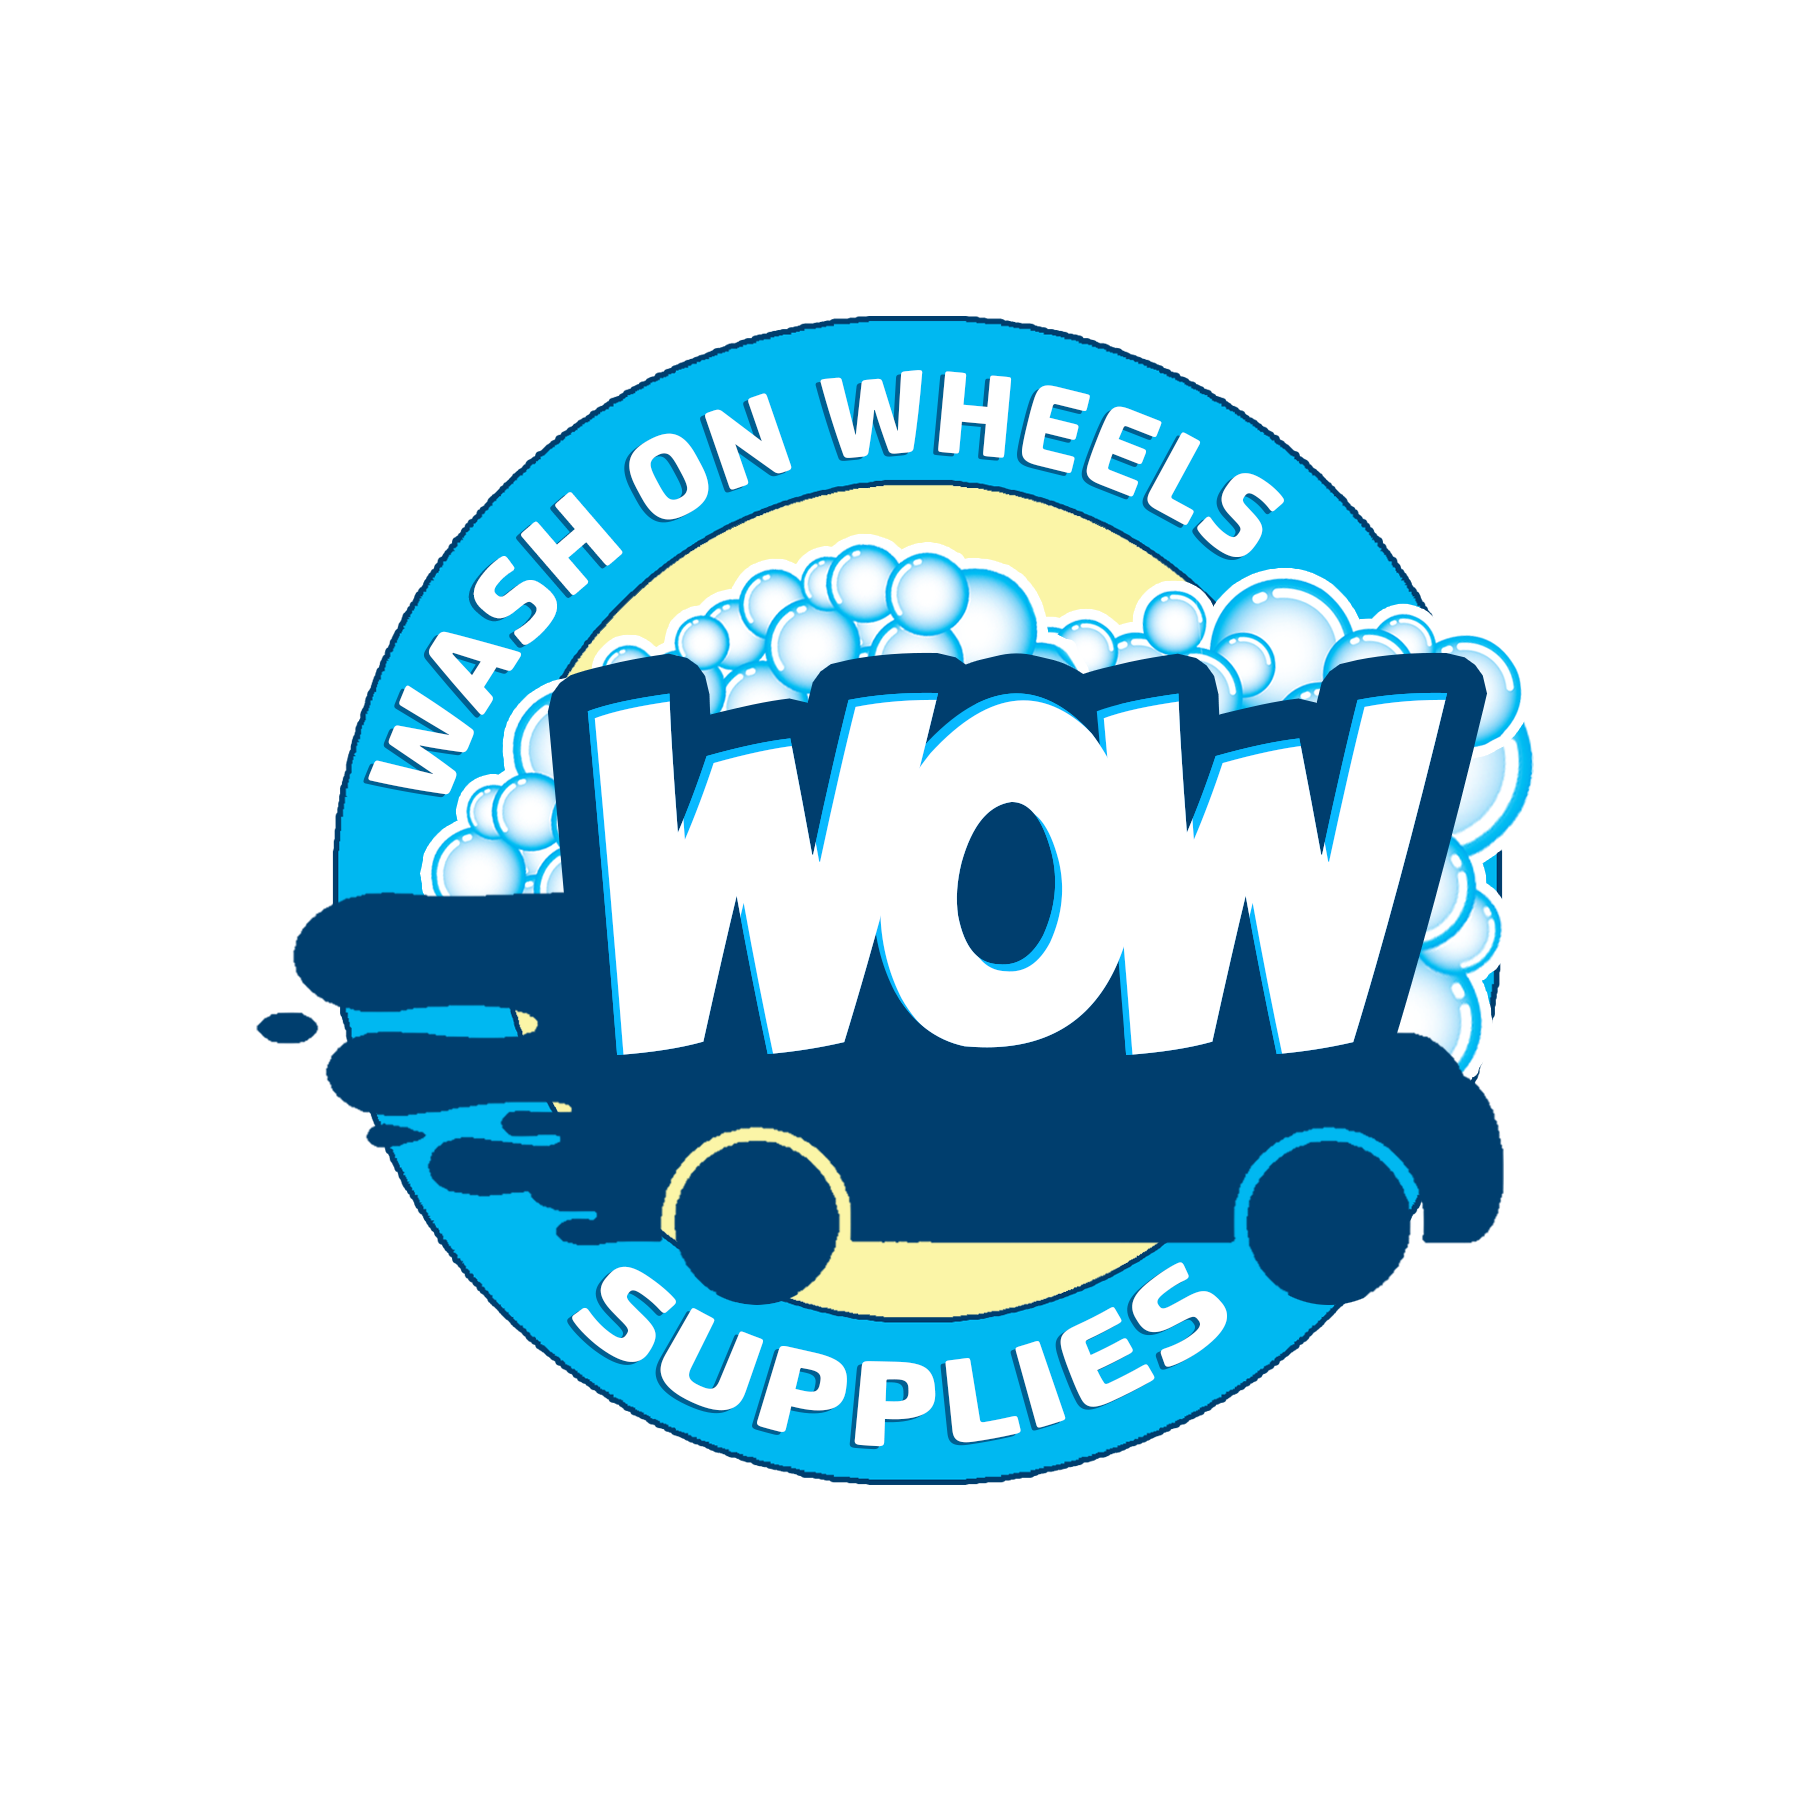 Wash on Wheels – Foam Cannon Soap + Wax, Car Wash Soap, Easy to Rinse Off Car Shampoo, Must-Have Car Exterior Care Products, Bubble Gum Foam Soap